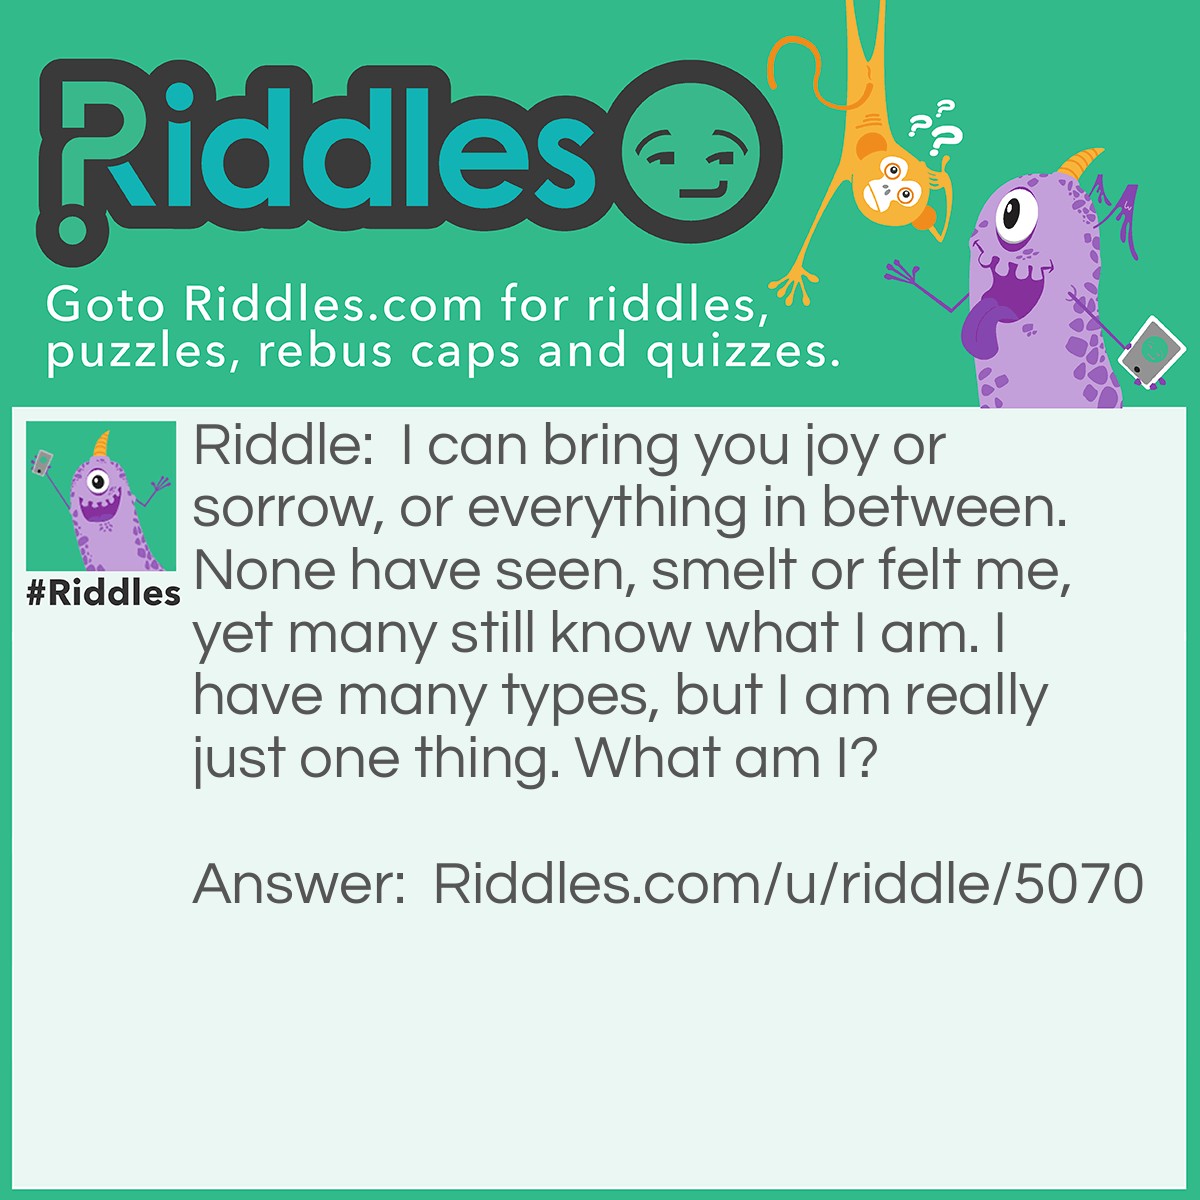 Riddle: I can bring you joy or sorrow, or everything in between. None have seen, smelt or felt me, yet many still know what I am. I have many types, but I am really just one thing. What am I? Answer: Music.